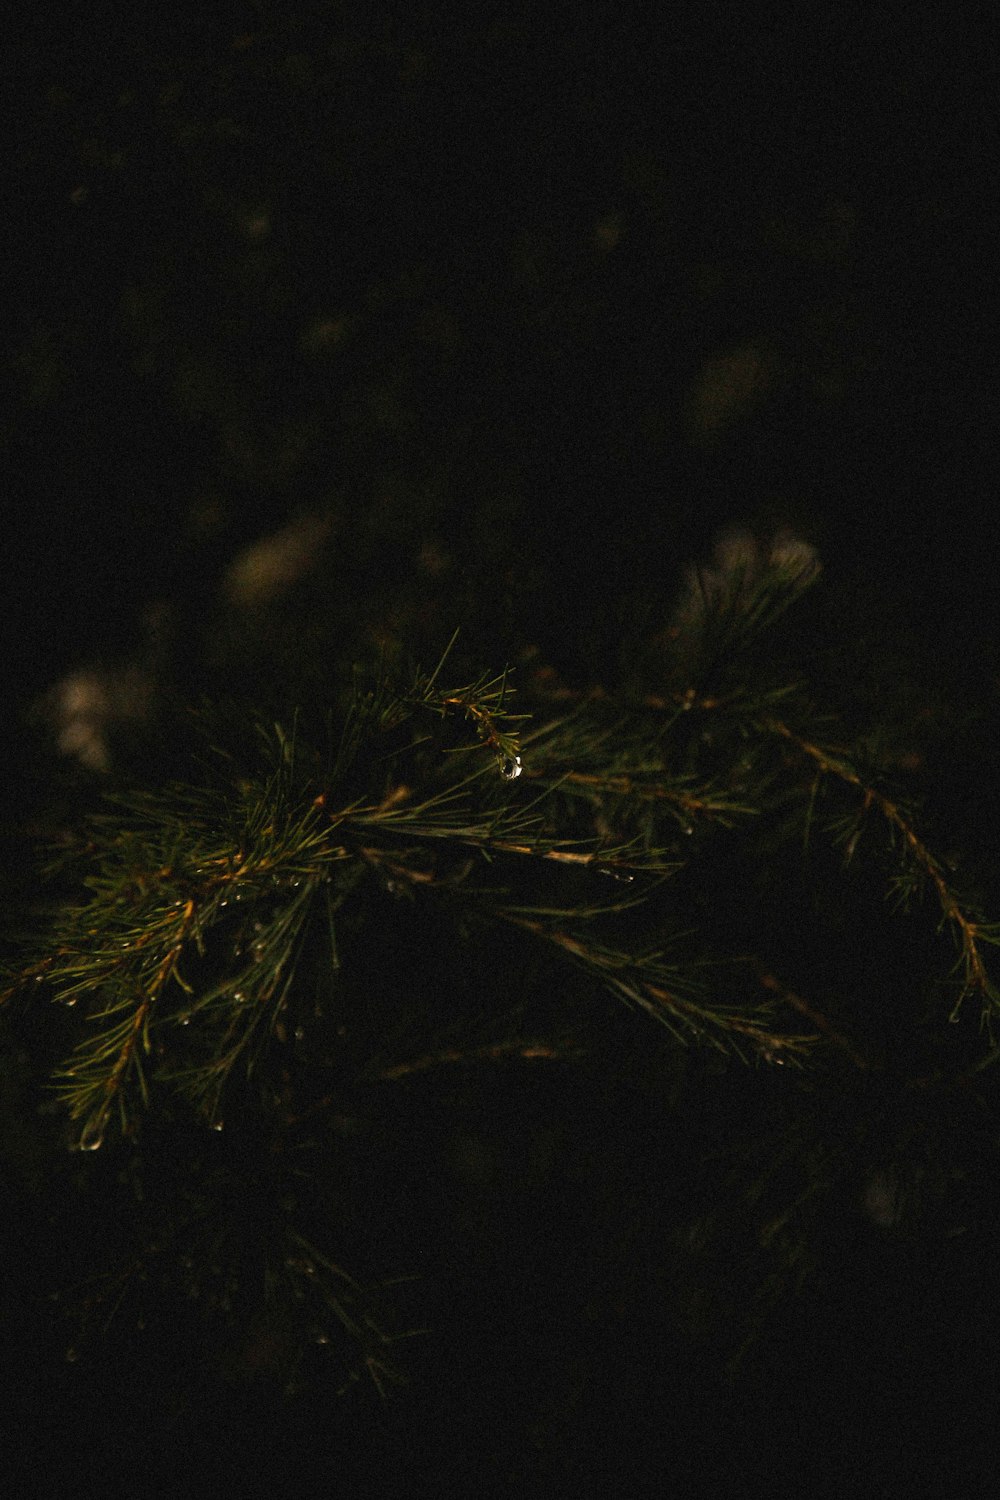 a close up of a pine tree at night